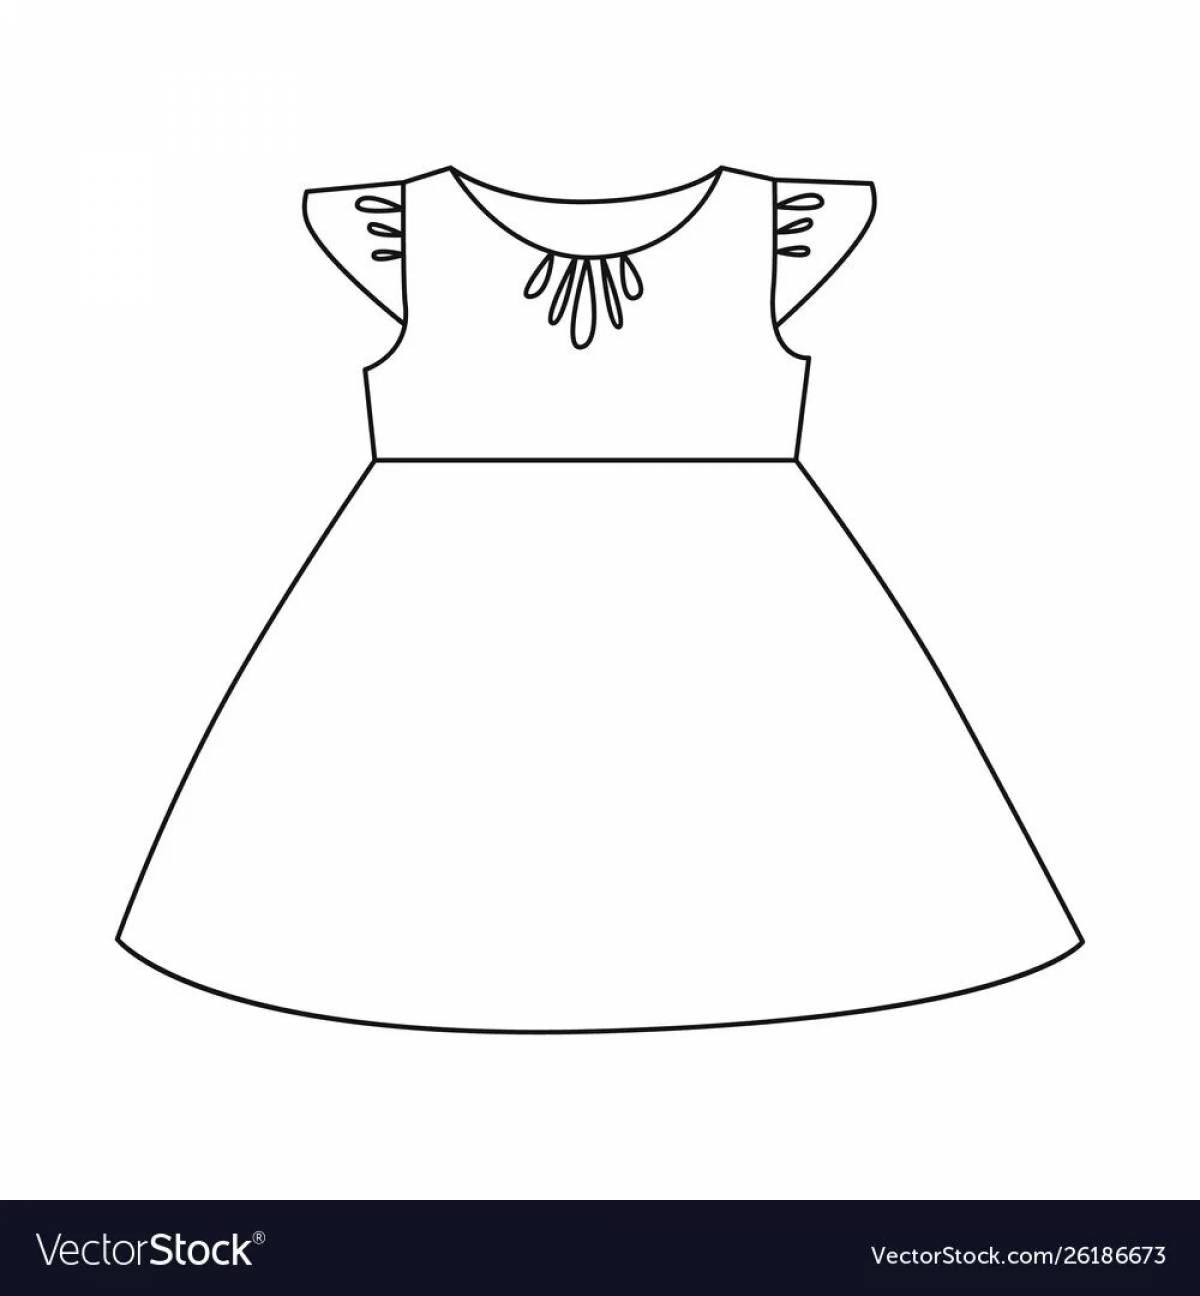 Fancy dress coloring page for children 2-3 years old